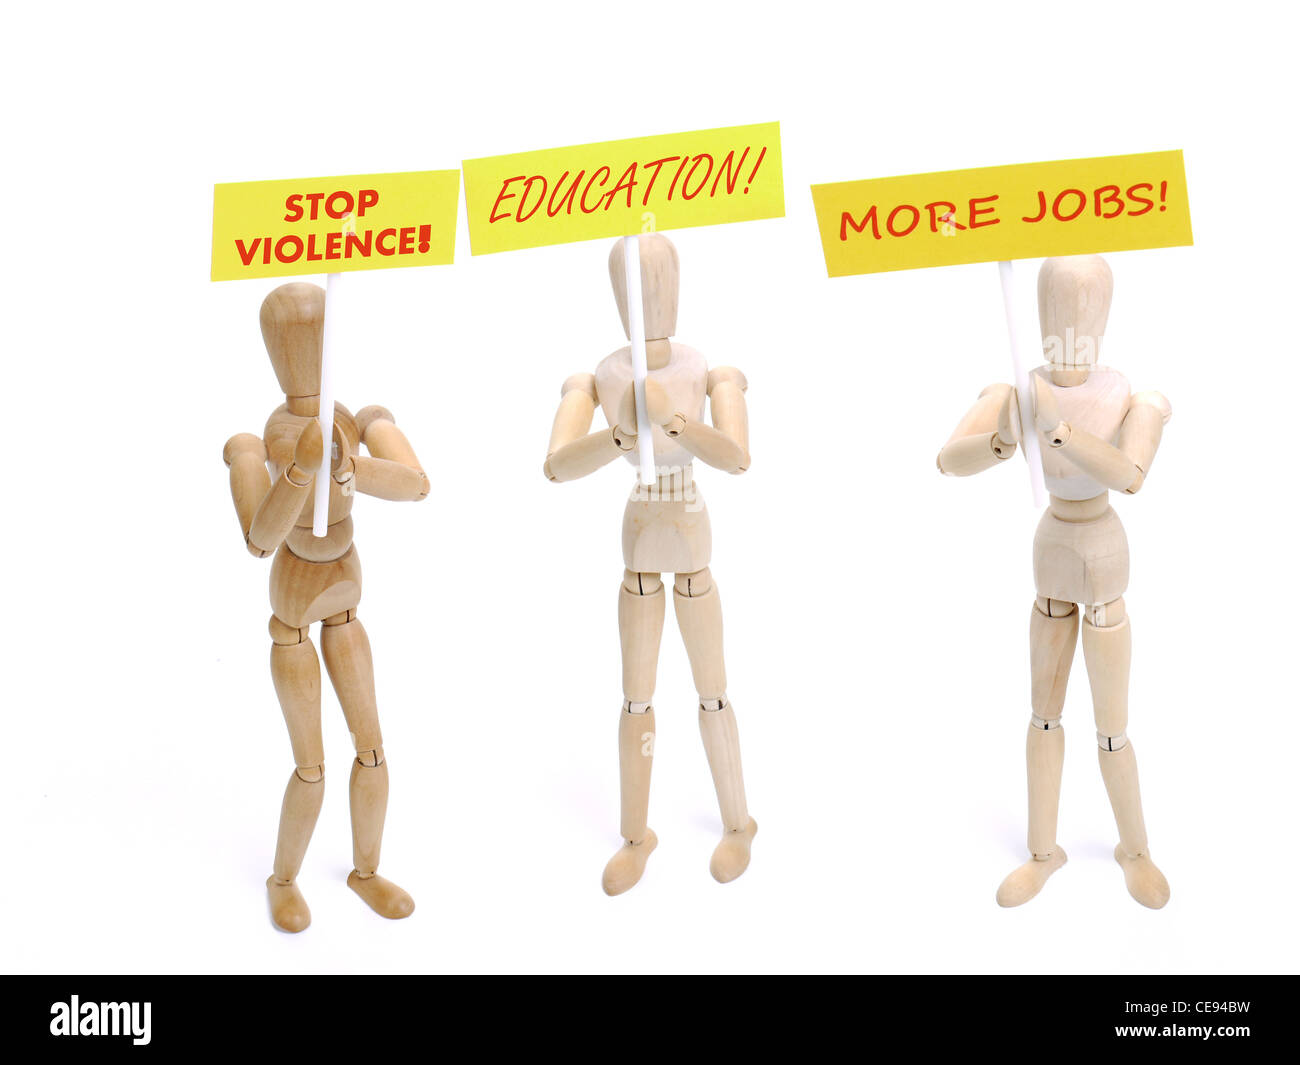 Three wooden dummy demonstrators holding placards saying - Stop Violence, Education and More Jobs shot on white background Stock Photo